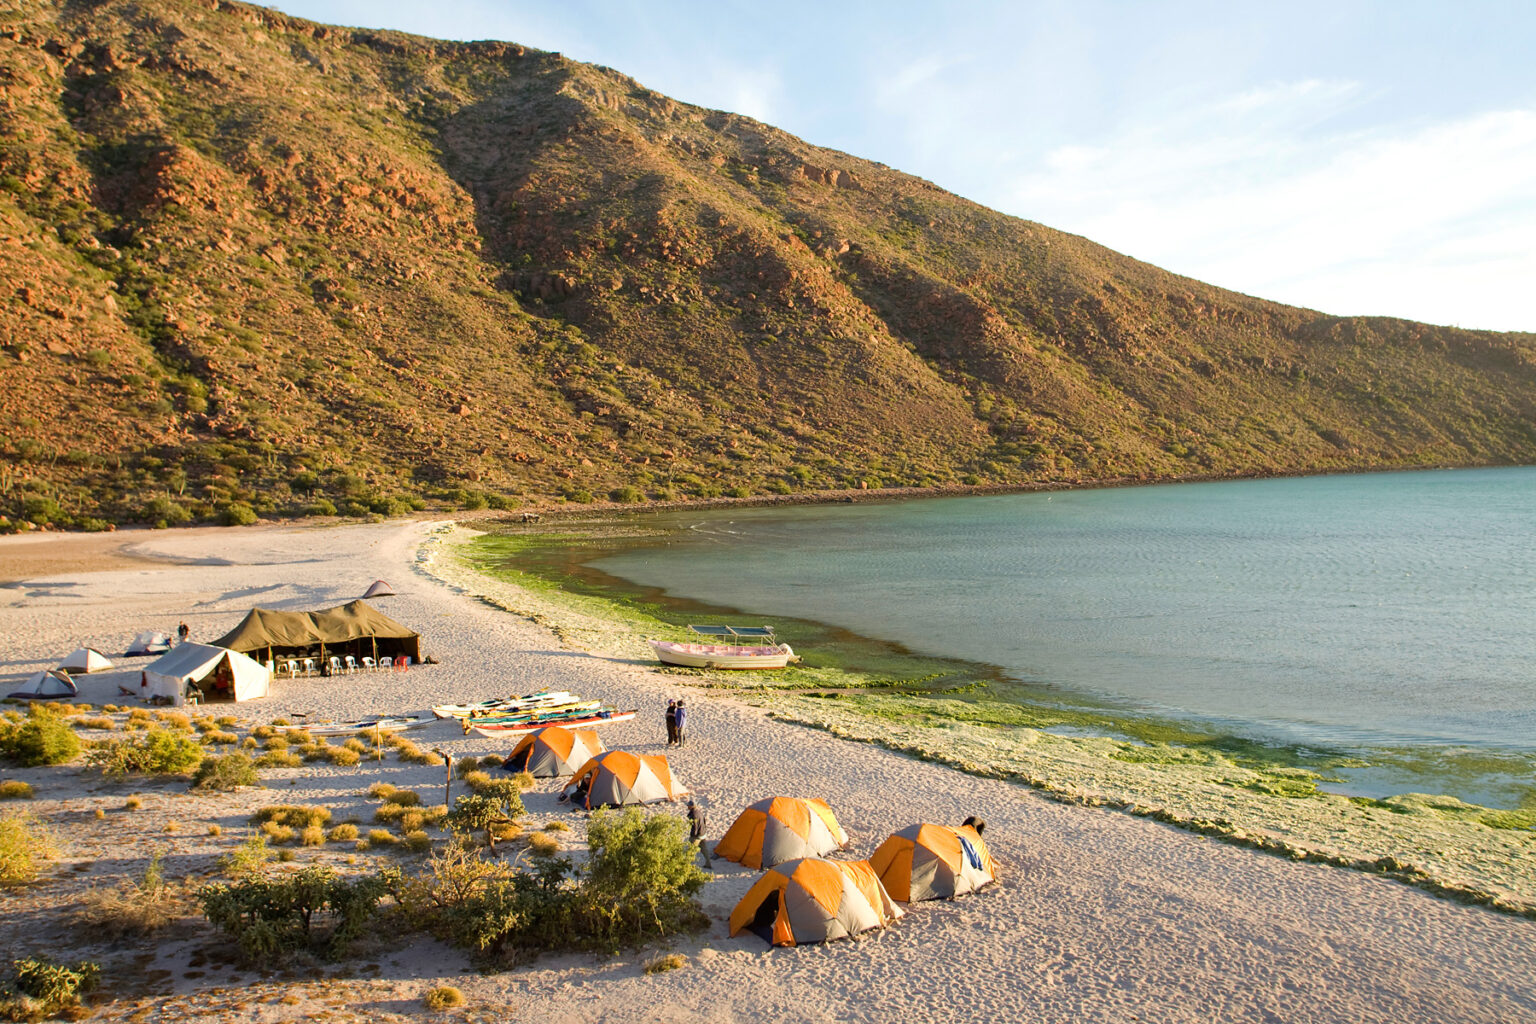 View from above of camp set up on the beach next to the ocean on a Sea Kayaking Espiritu Santo Island trip in Baja Mexico